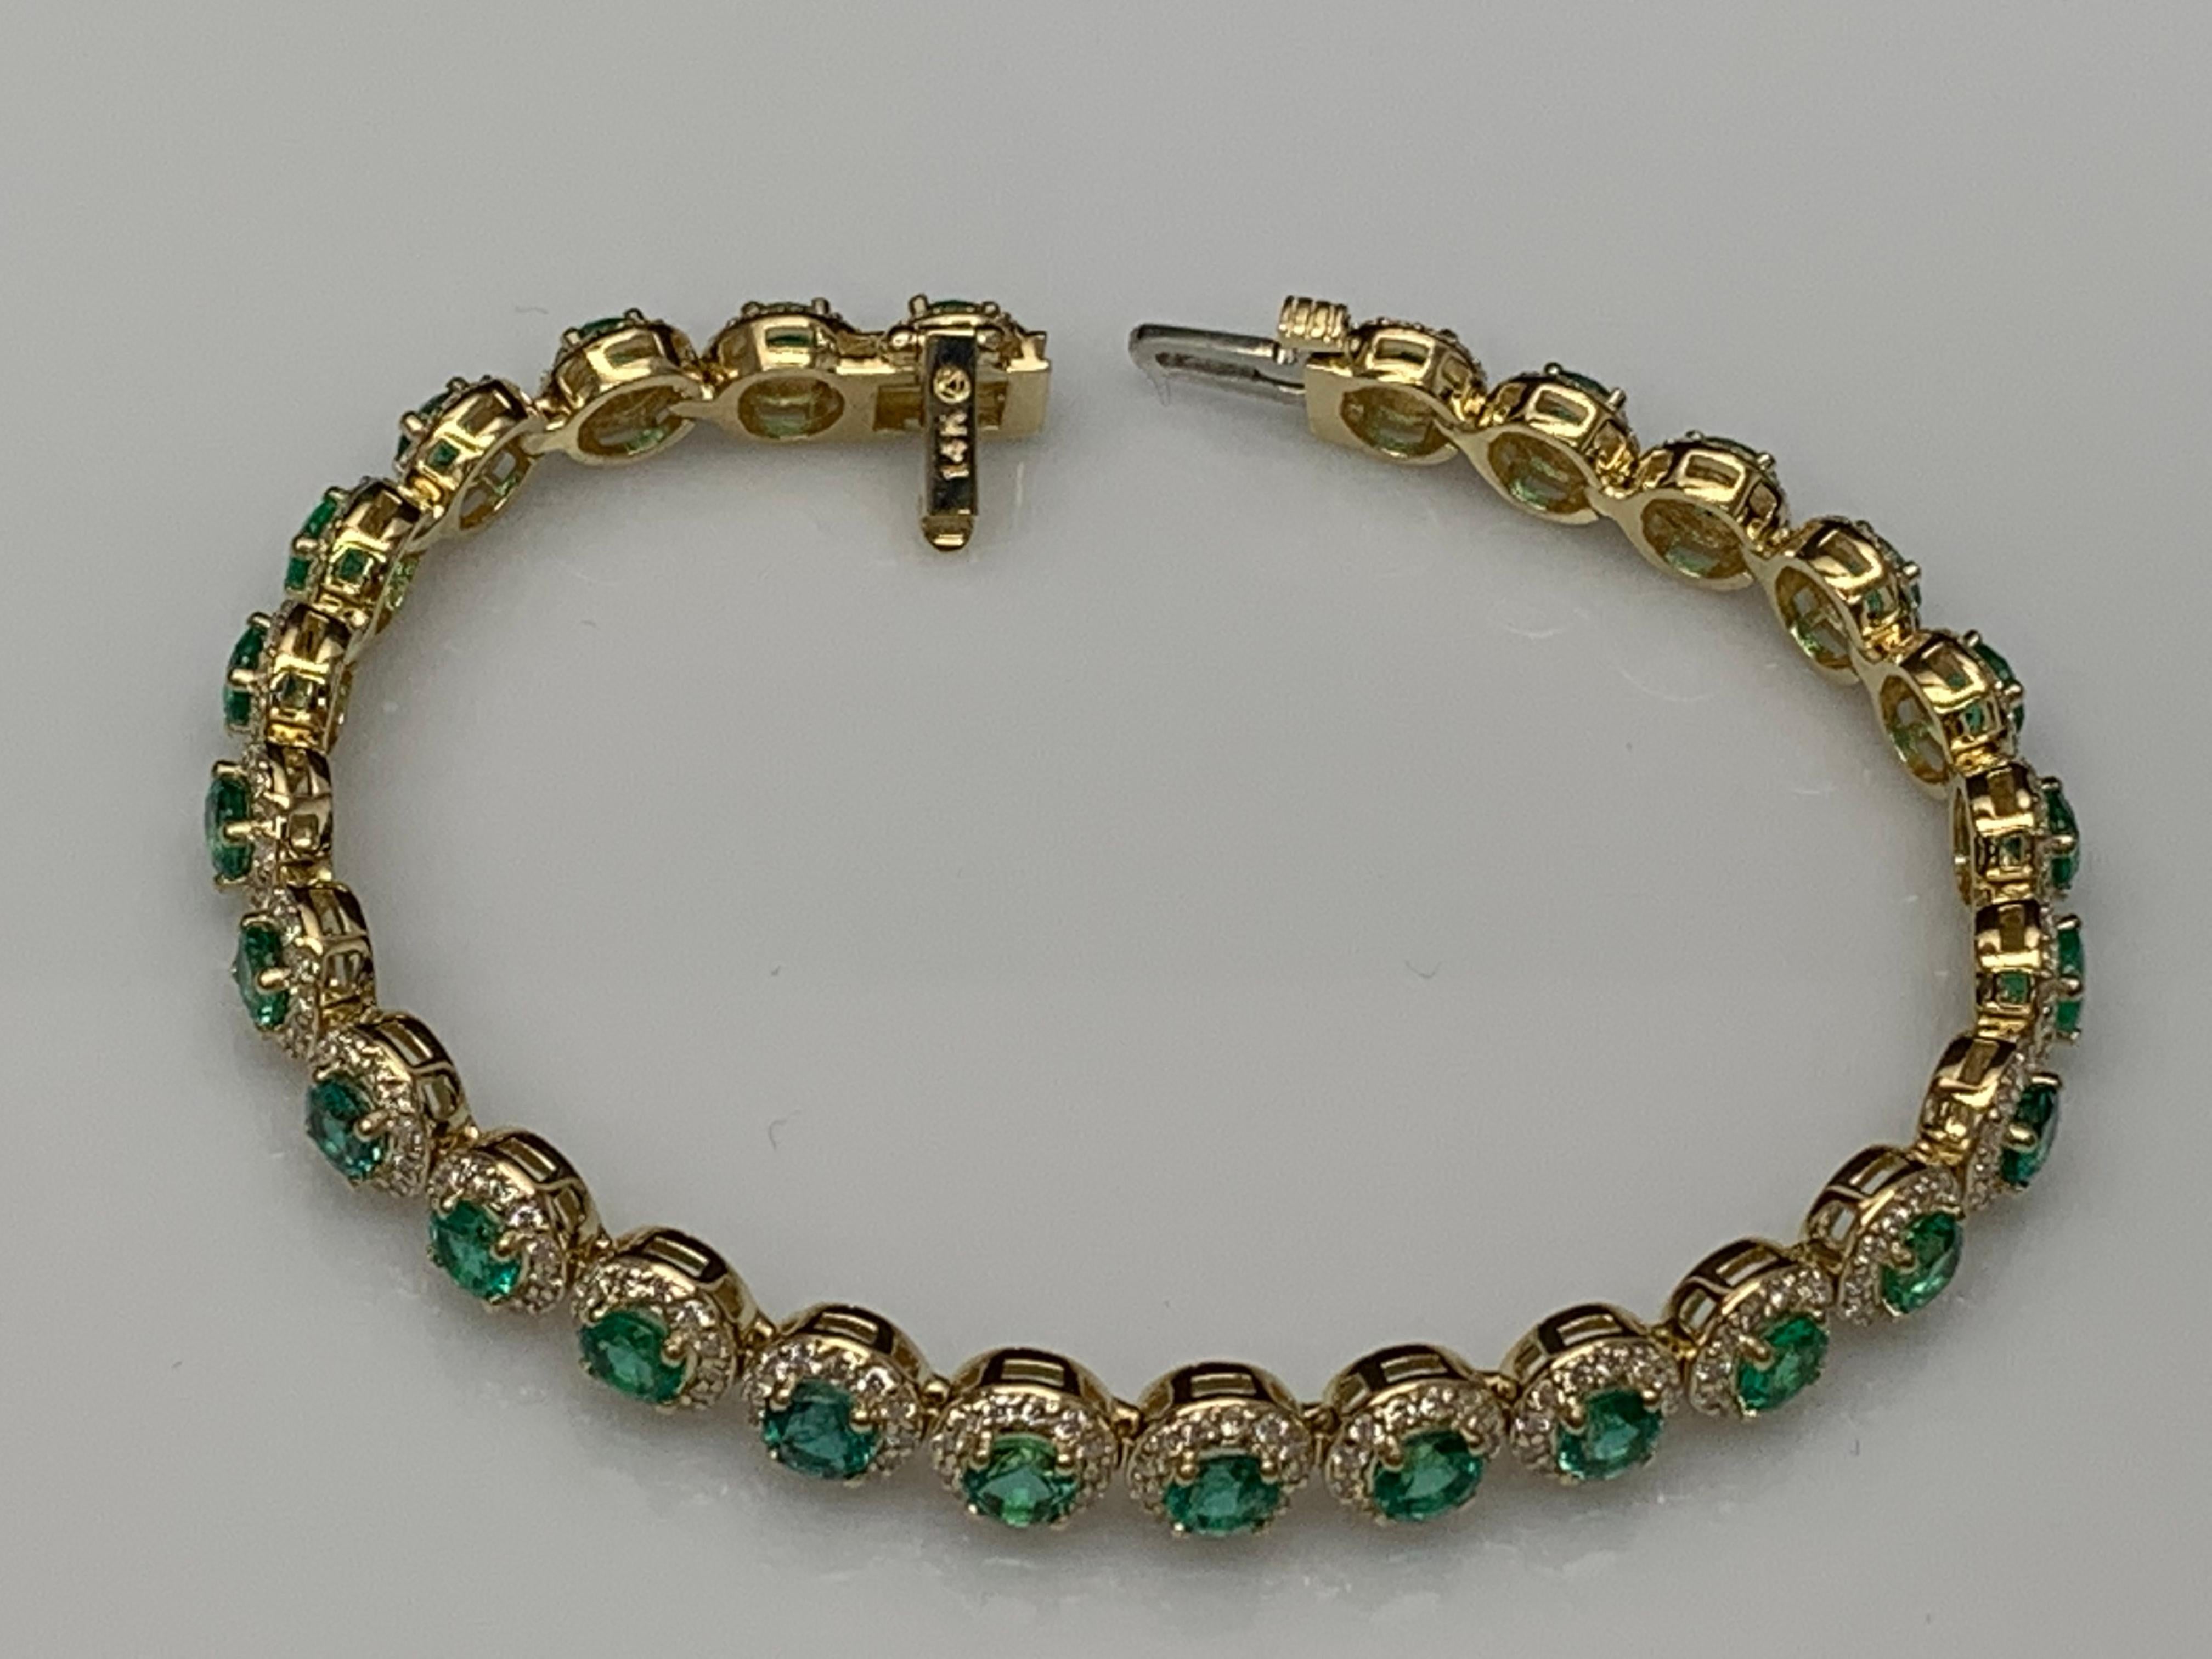 6.94 Carat Emerald and Diamond Halo Tennis Bracelet in 14k Yellow Gold For Sale 5